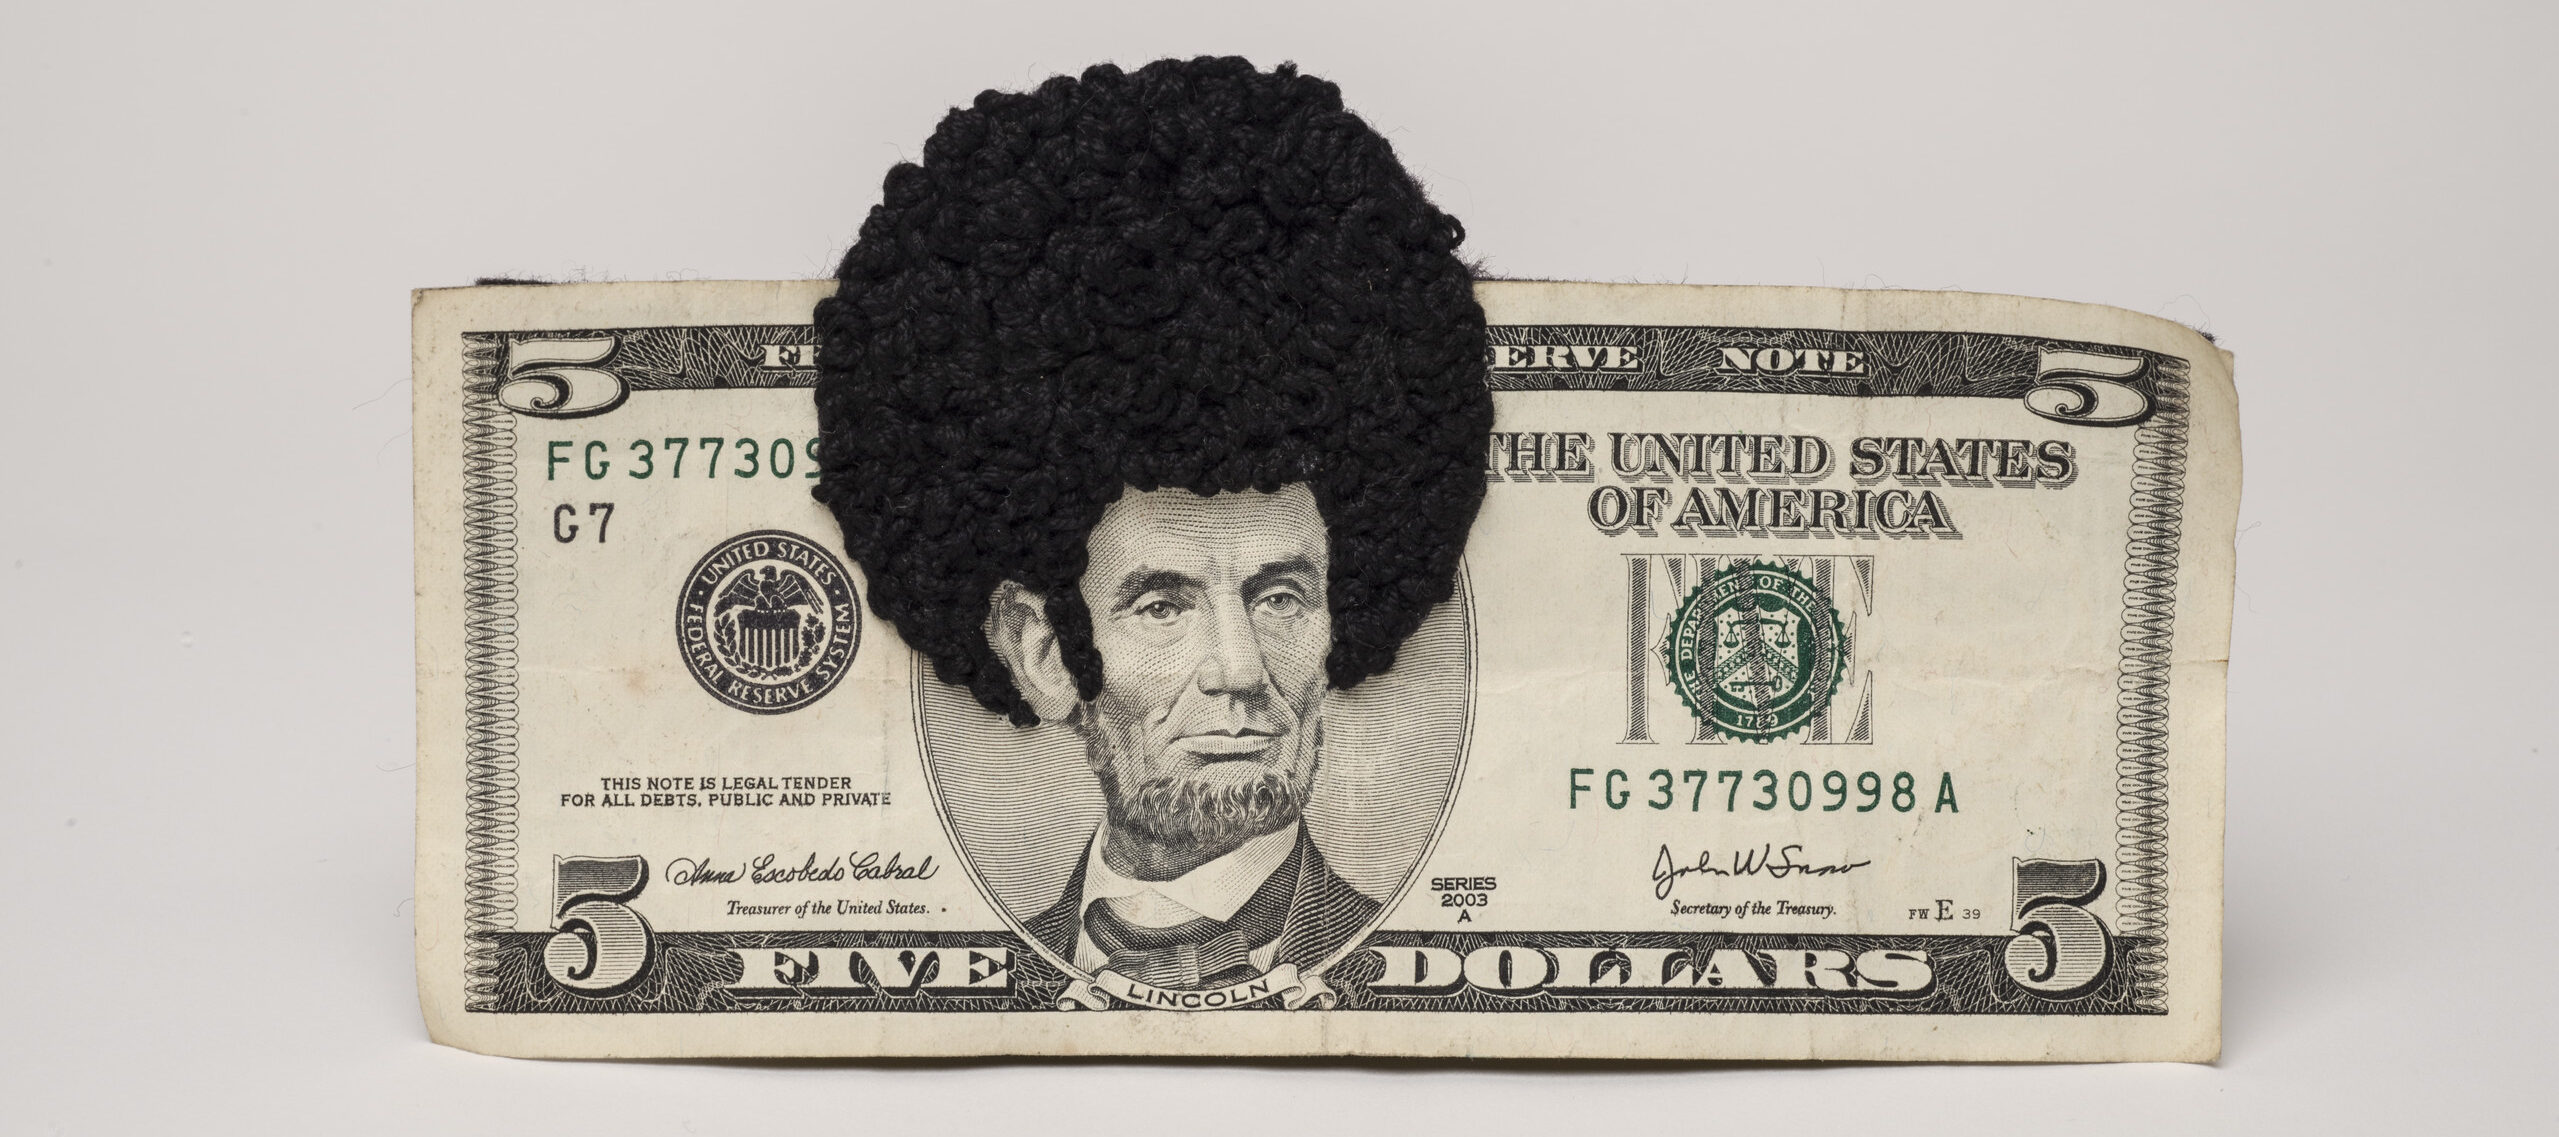 U.S. five-dollar bill has an embroidered afro and sideburns stitched onto the portrait of Lincoln’s head. One-third of the afro protrudes beyond the top of the bill.